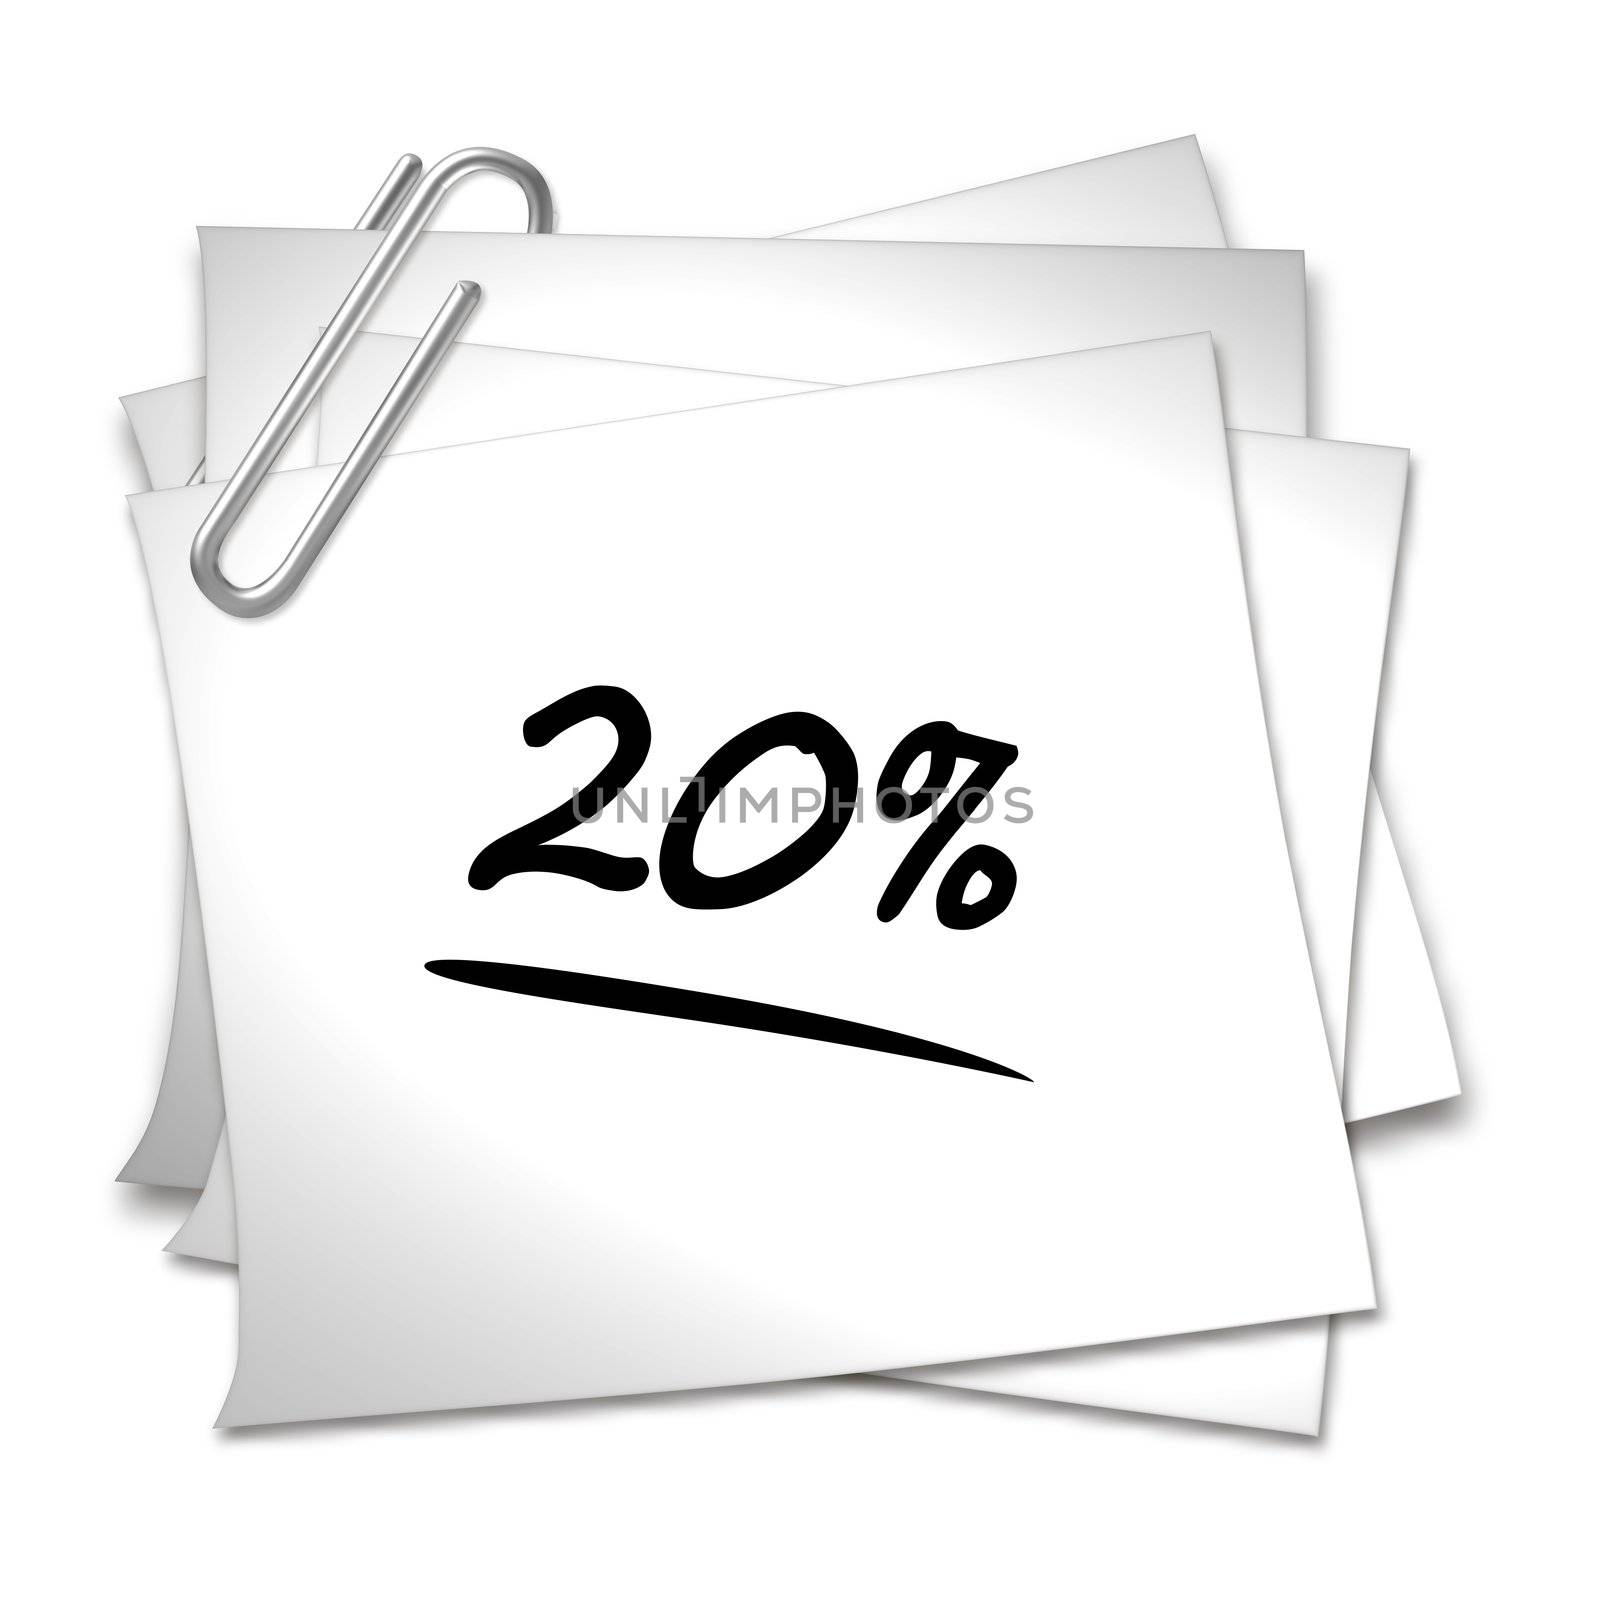 Memo with Paper Clip - 20 % by peromarketing